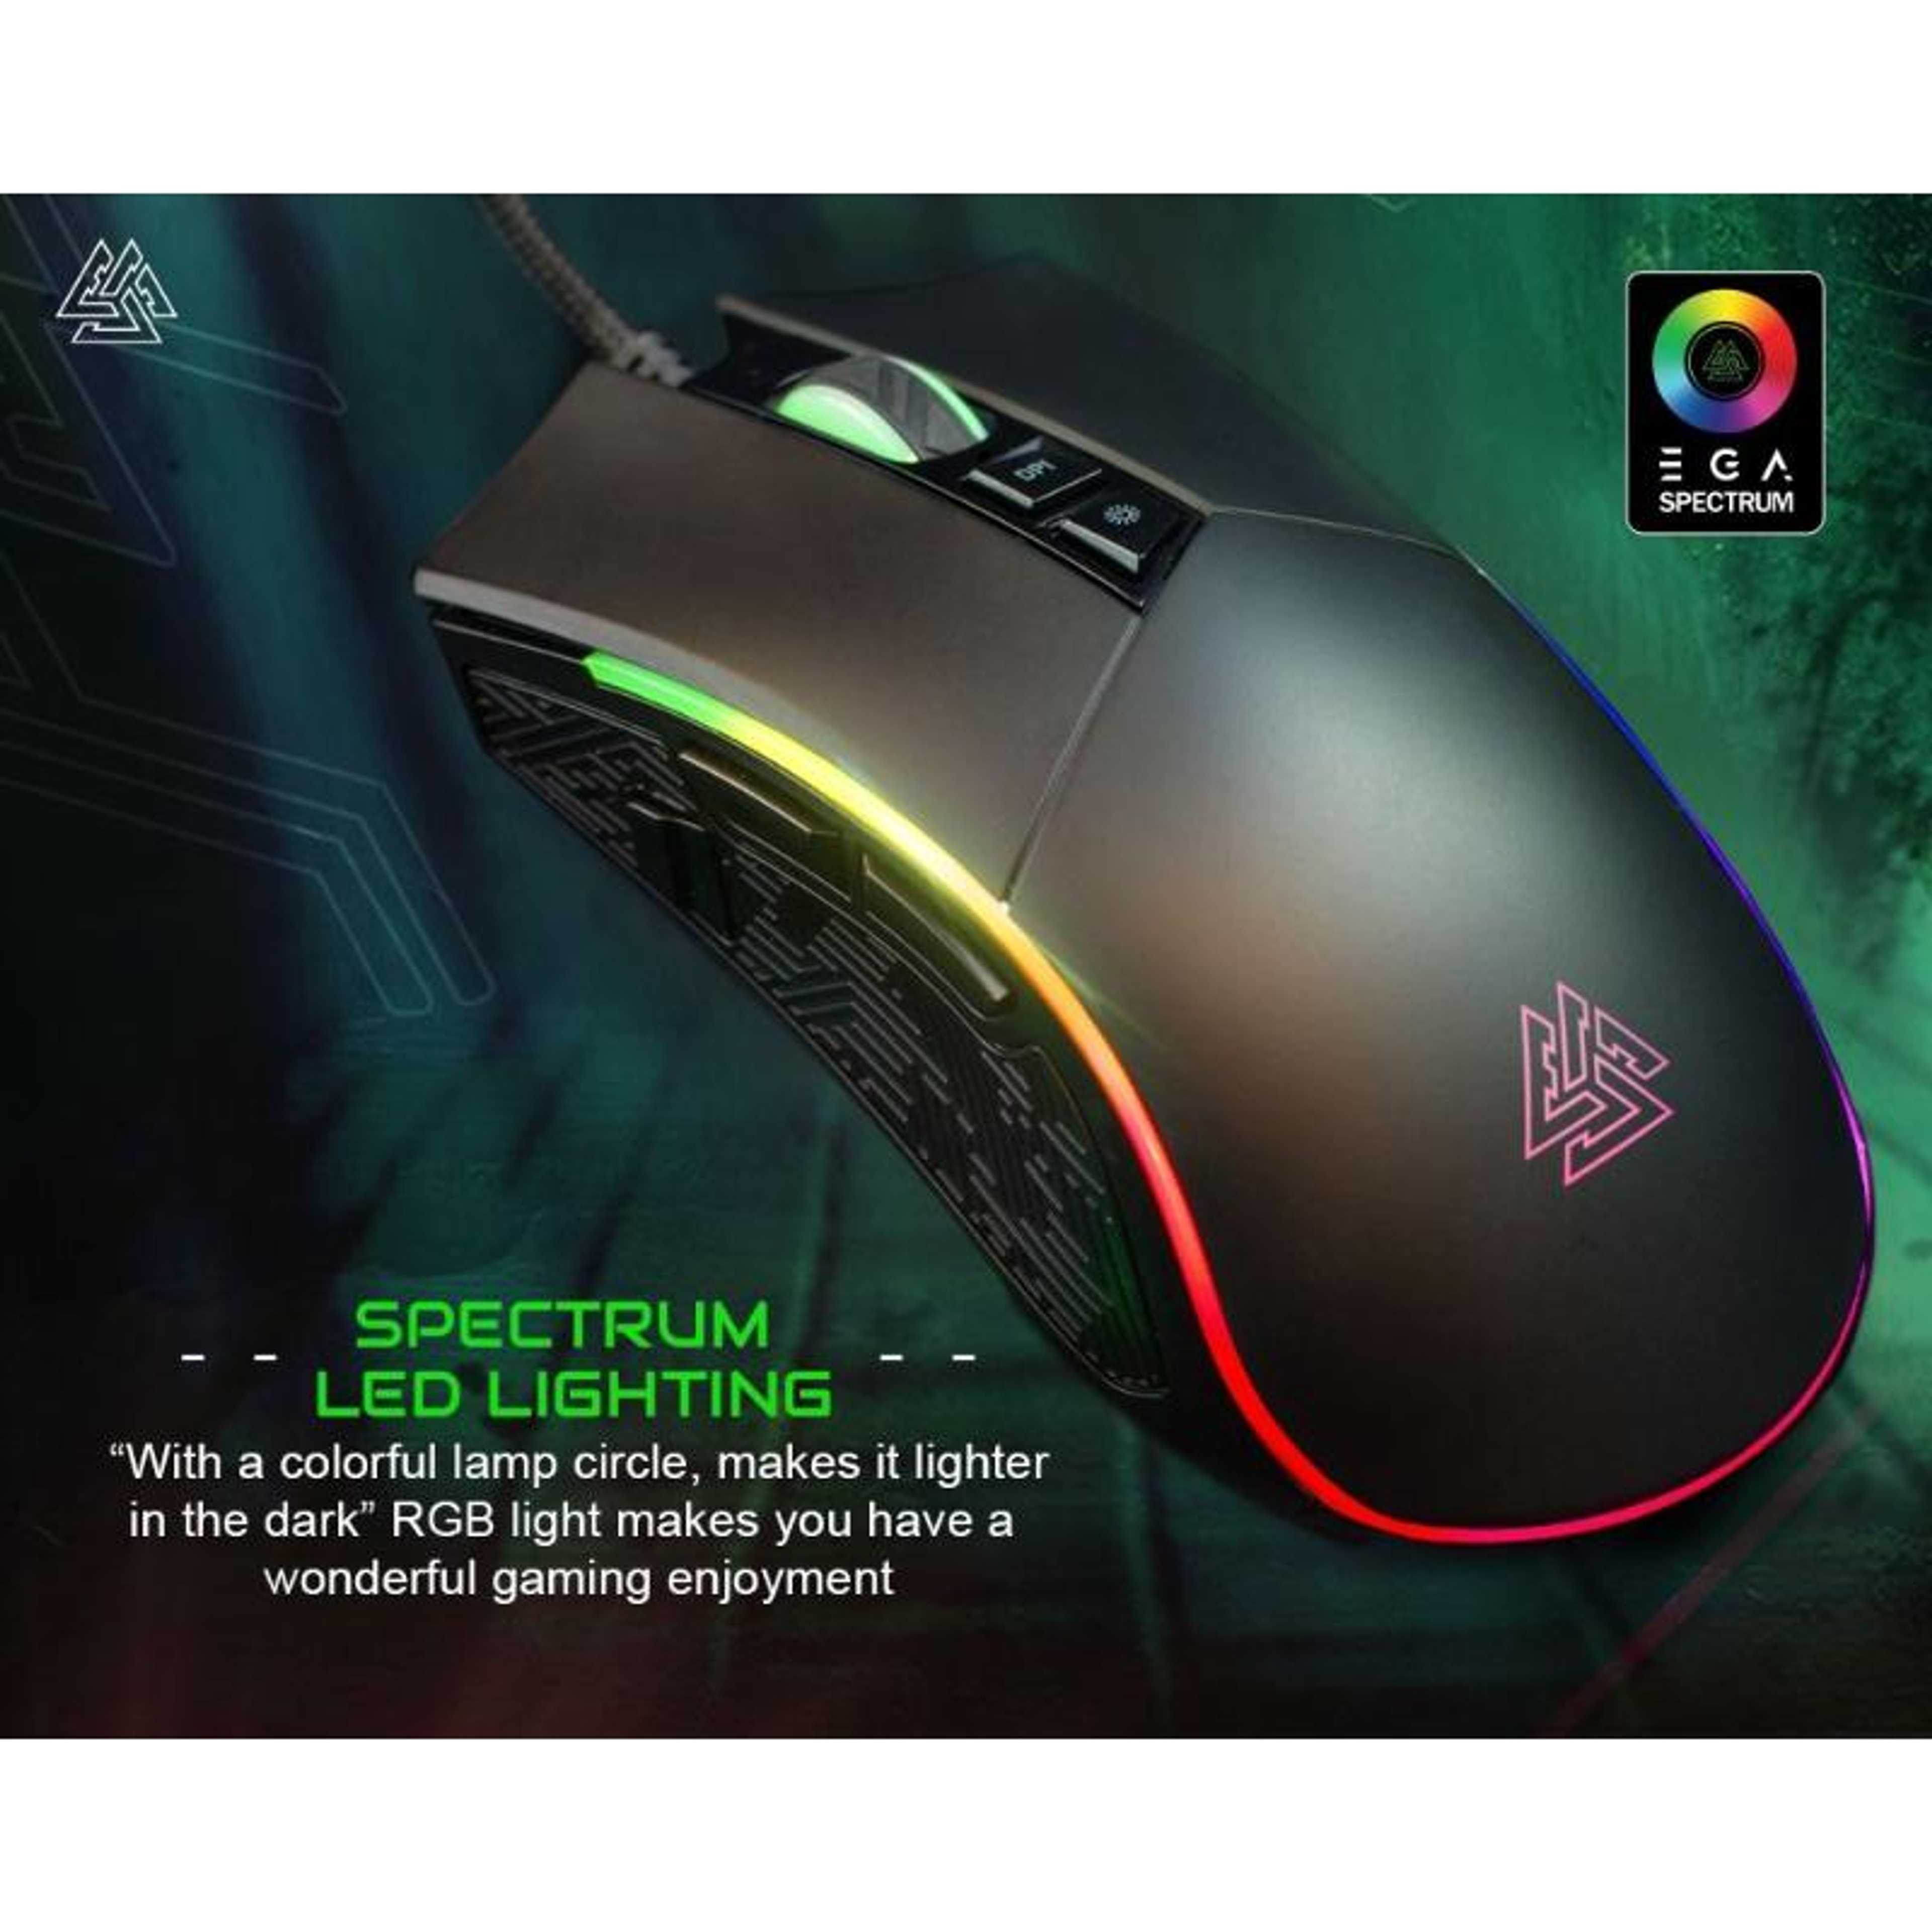 EGA Zone Type M6 Spectrum Blacklighting  Gaming Mouse- Chipset Sunplus 199IC With Memory Built-In -6400DPI